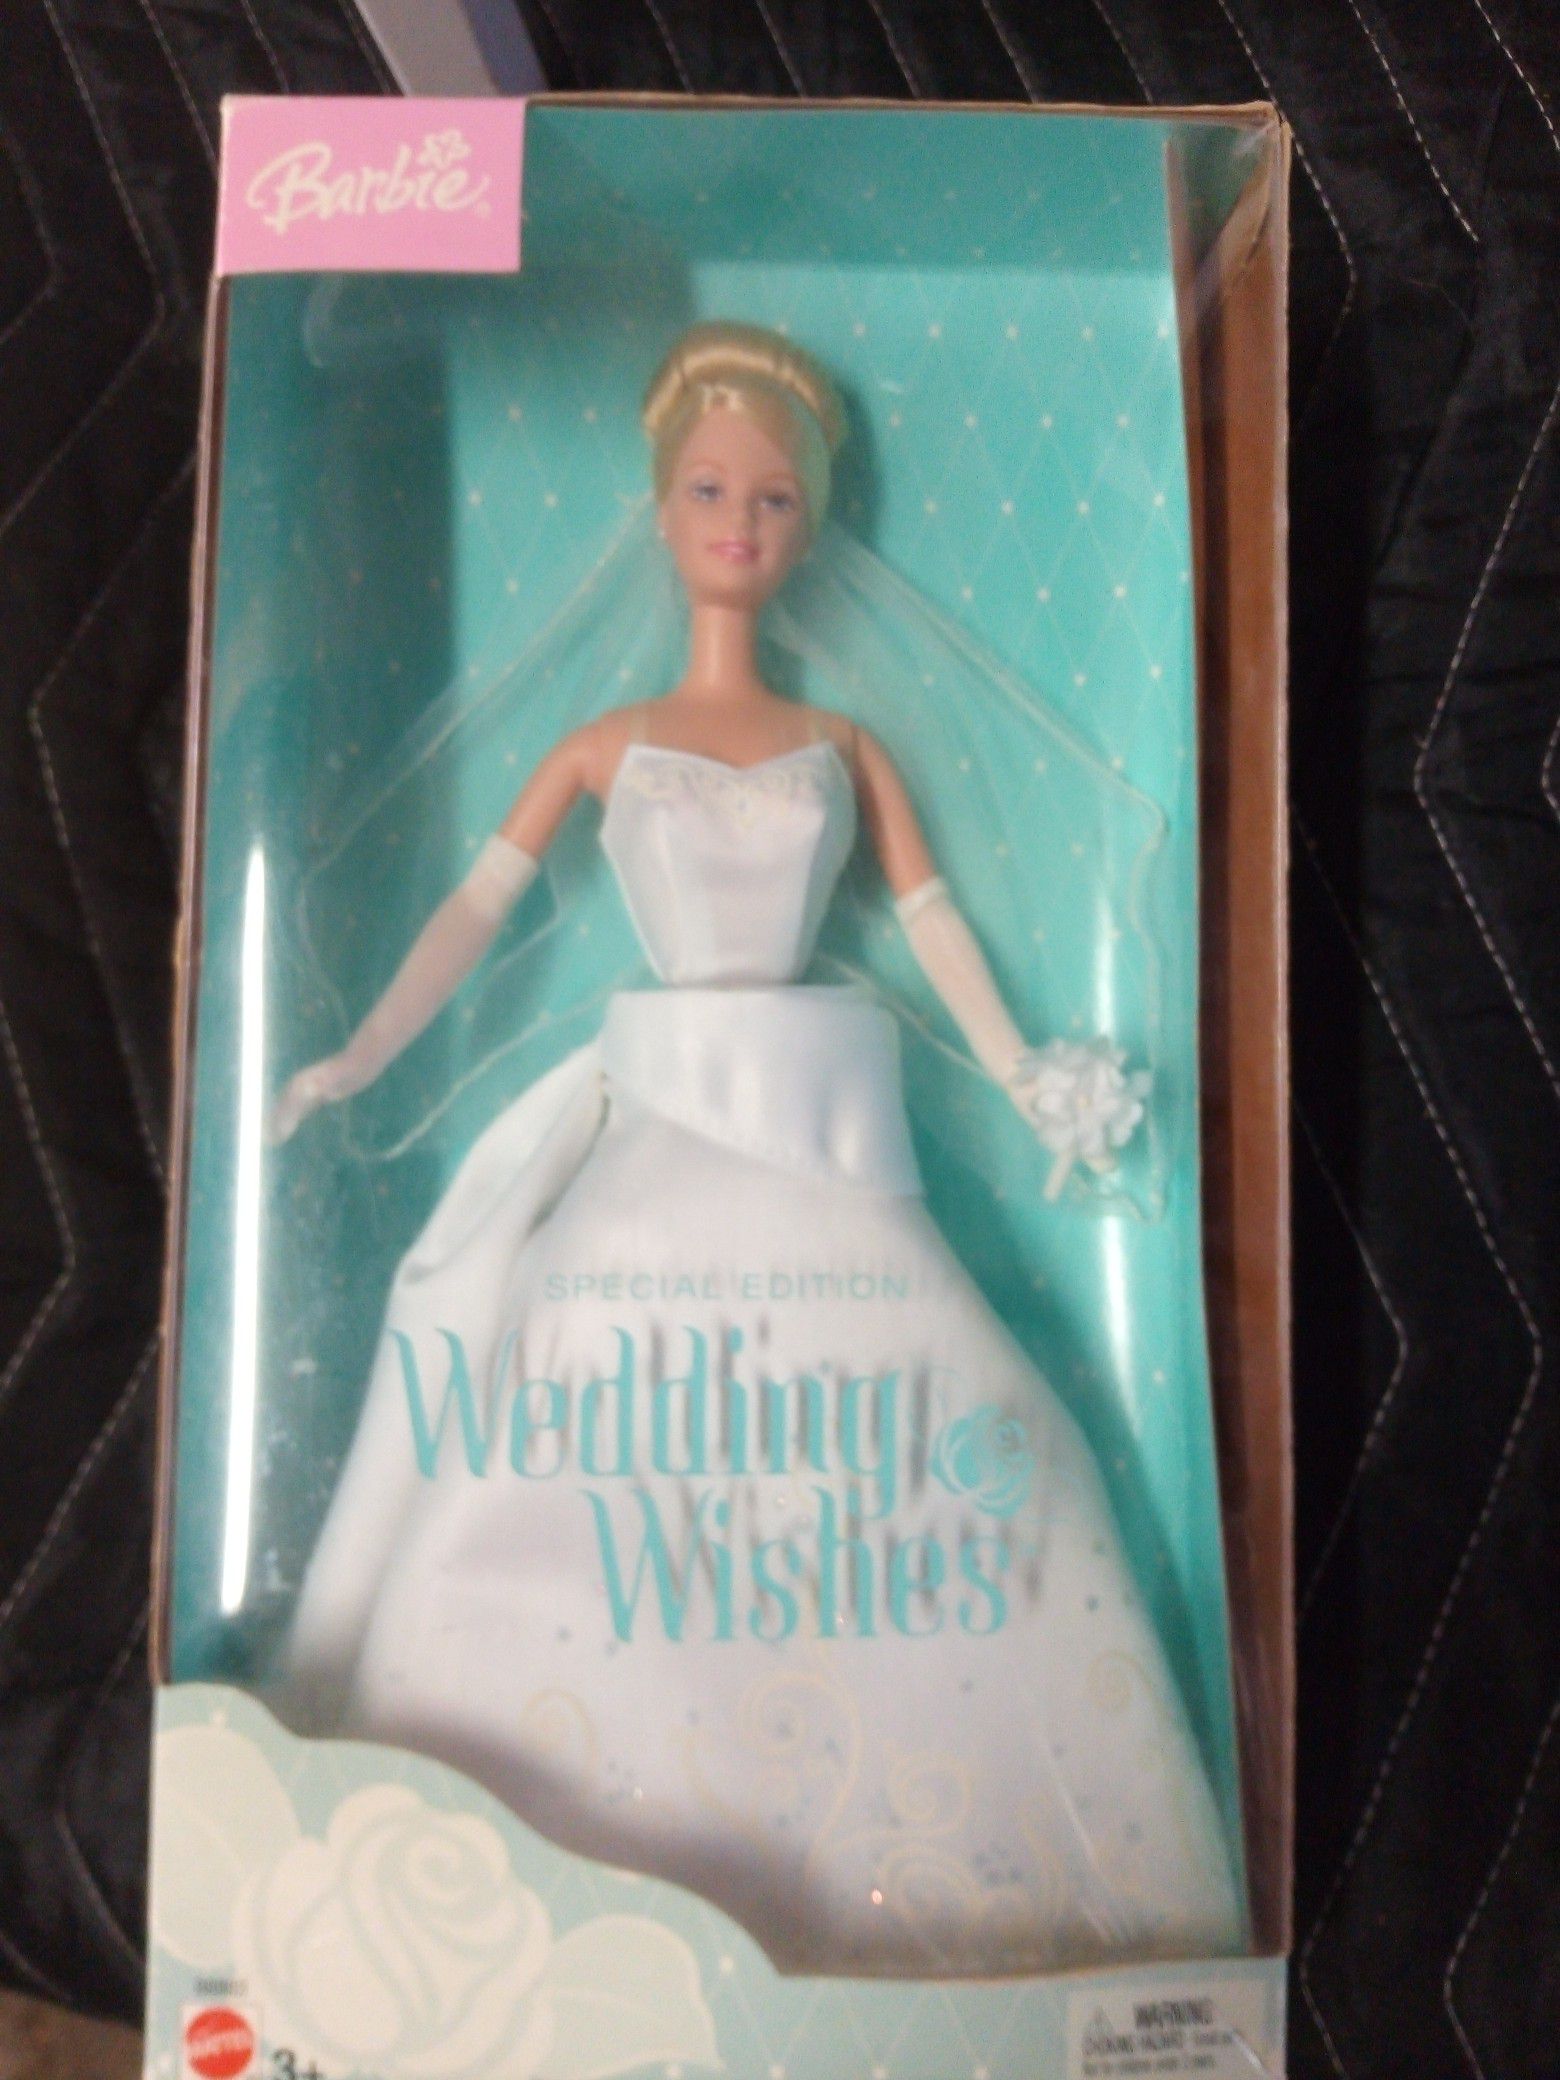 Wedding Wishes special edition 2003 unopened